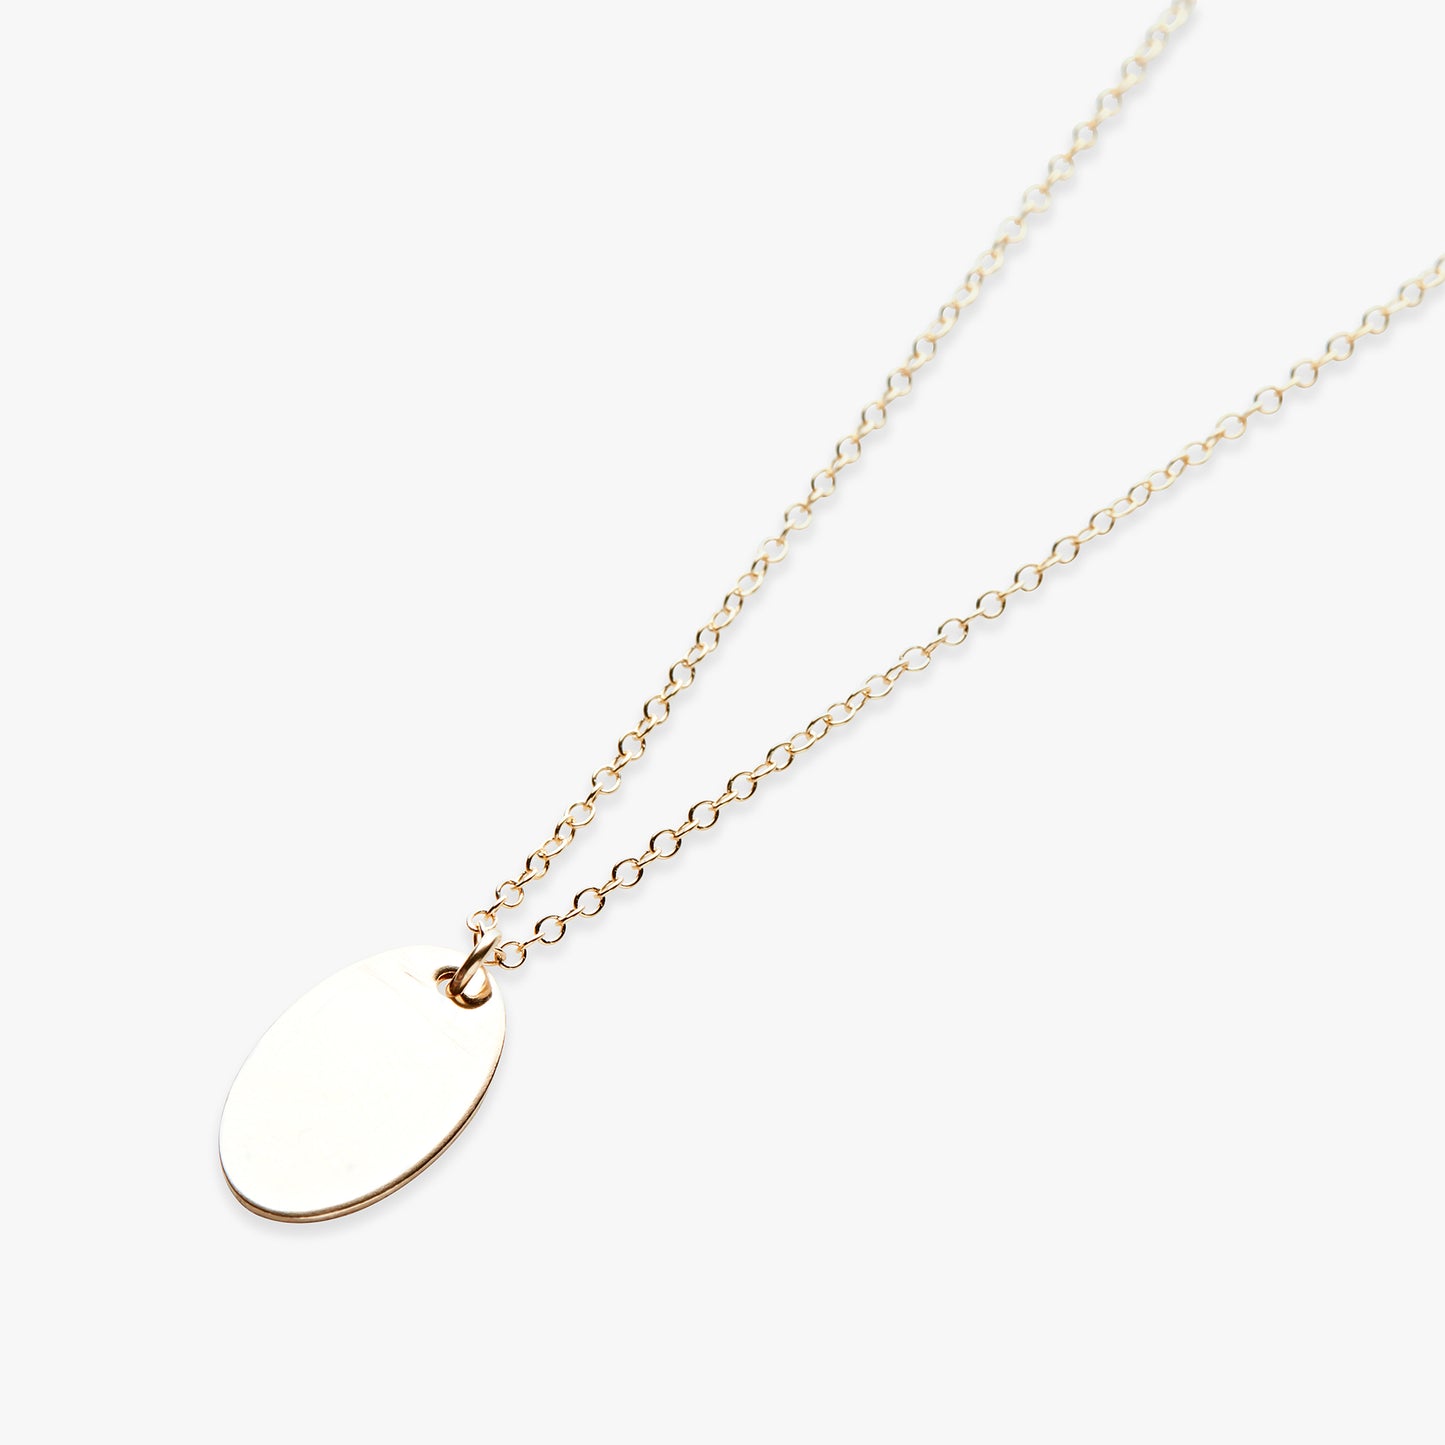 Large oval pendant necklace gold filled